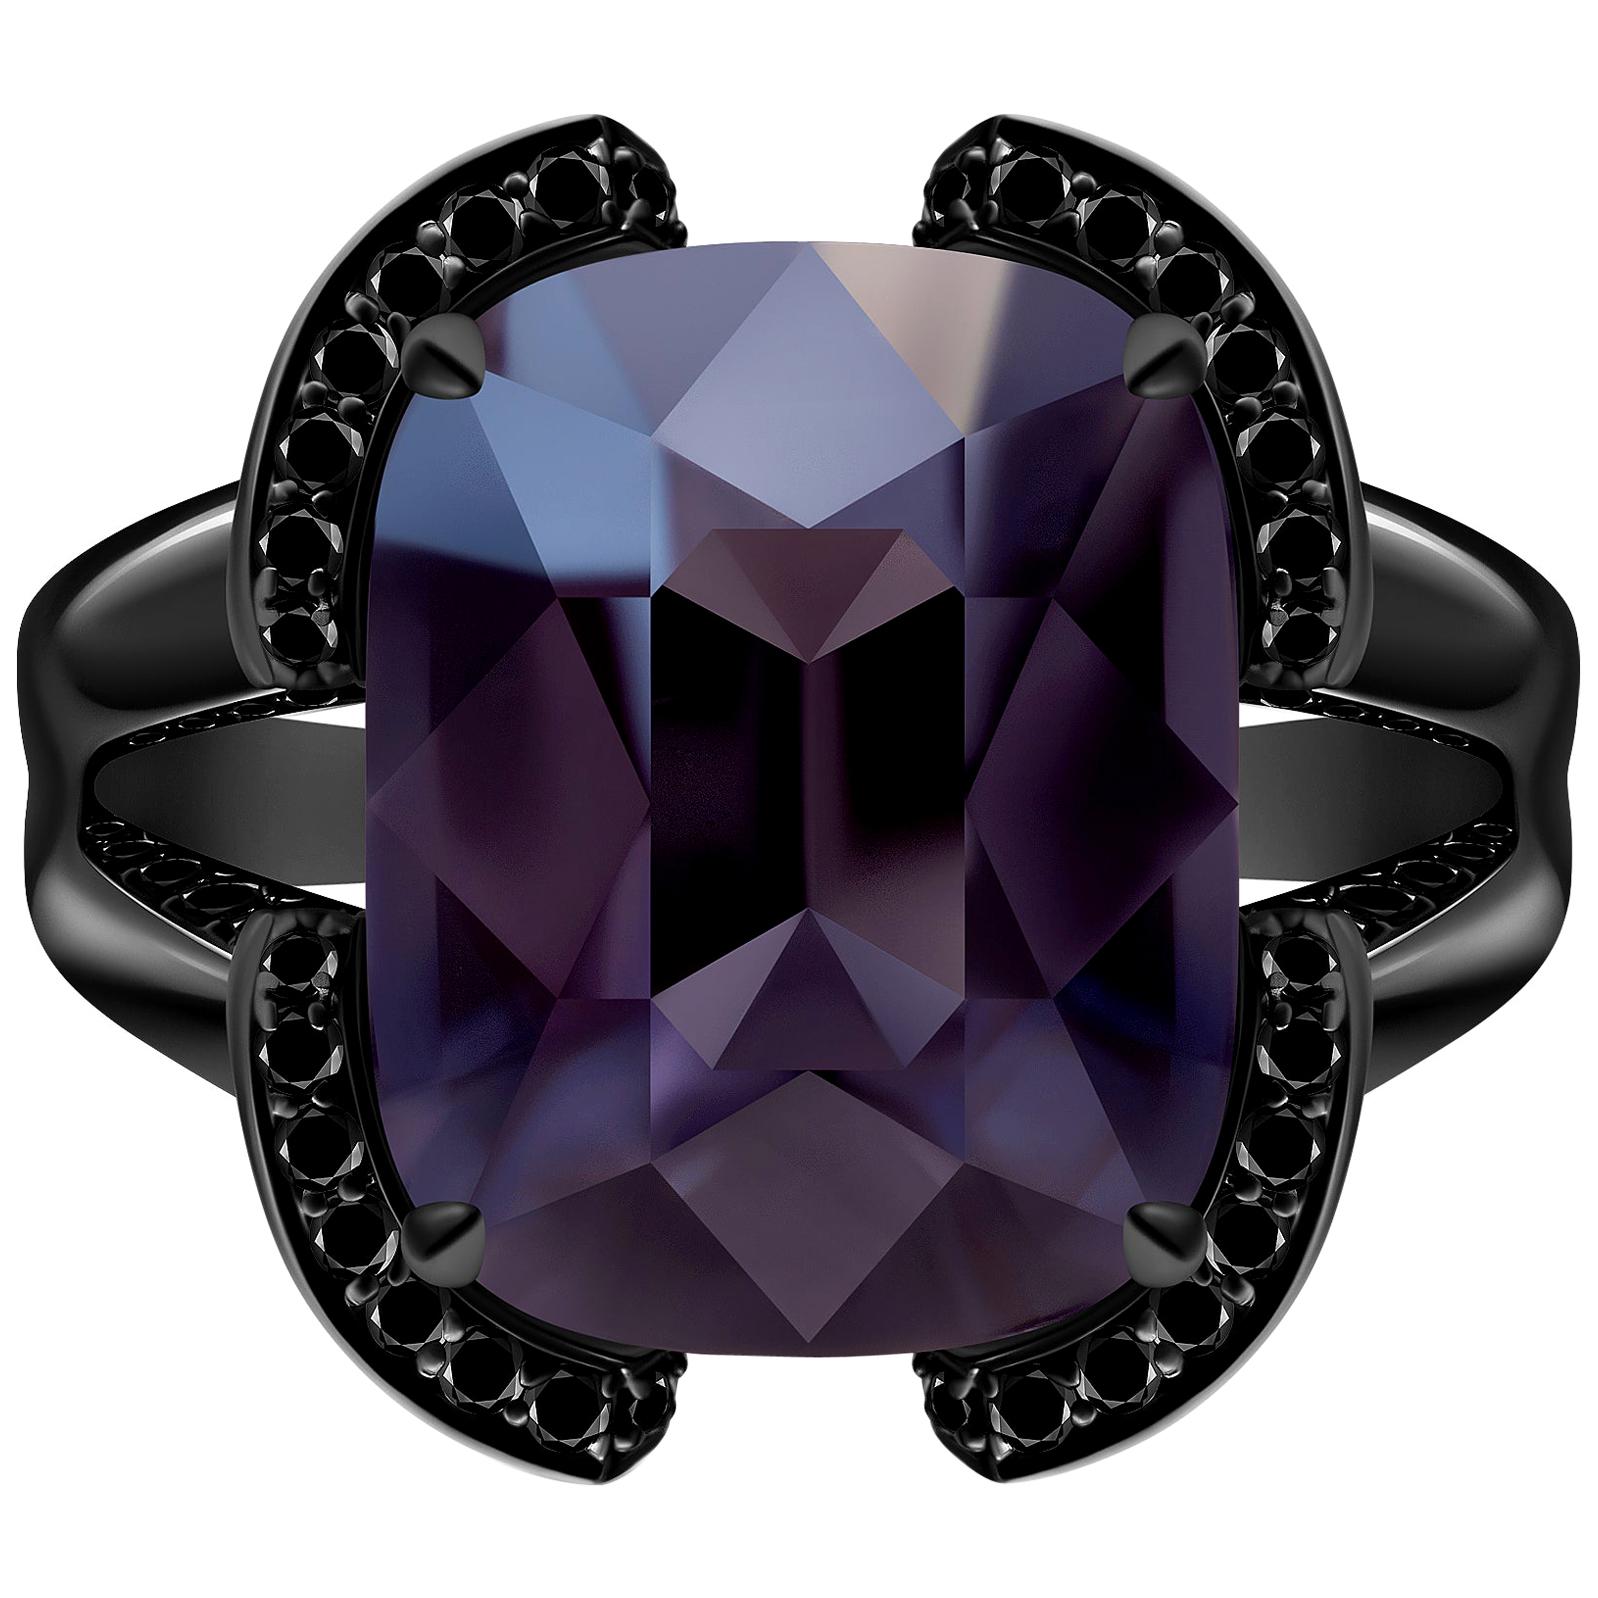 Purchase the High-Quality Black Opal Engagement Rings | GLAMIRA.com